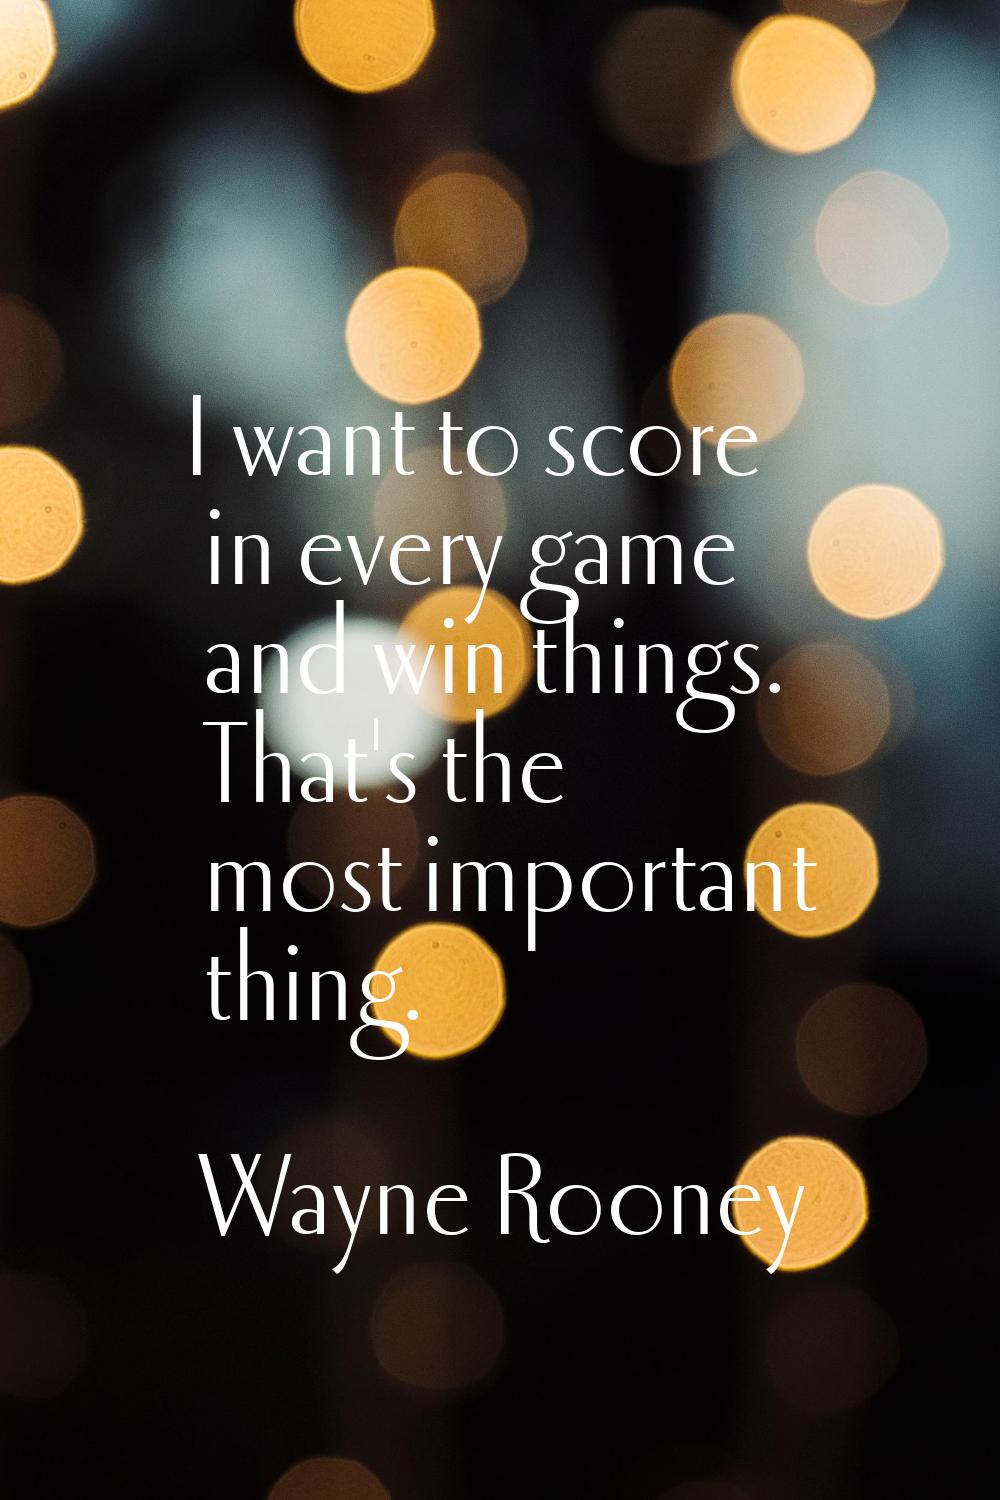 I want to score in every game and win things. That's the most important thing.